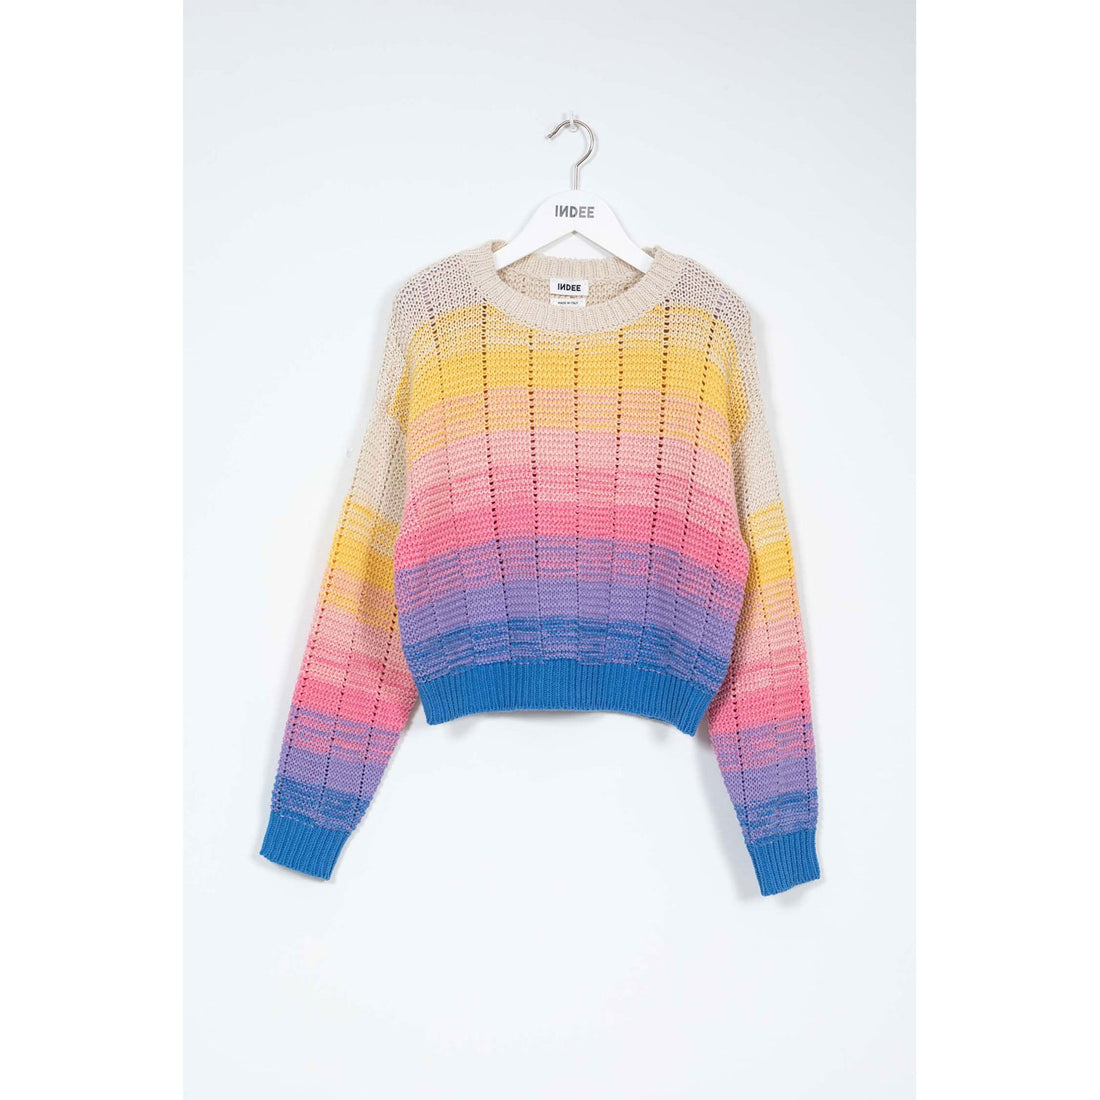 Indee Candy Pink Knitted Sweater